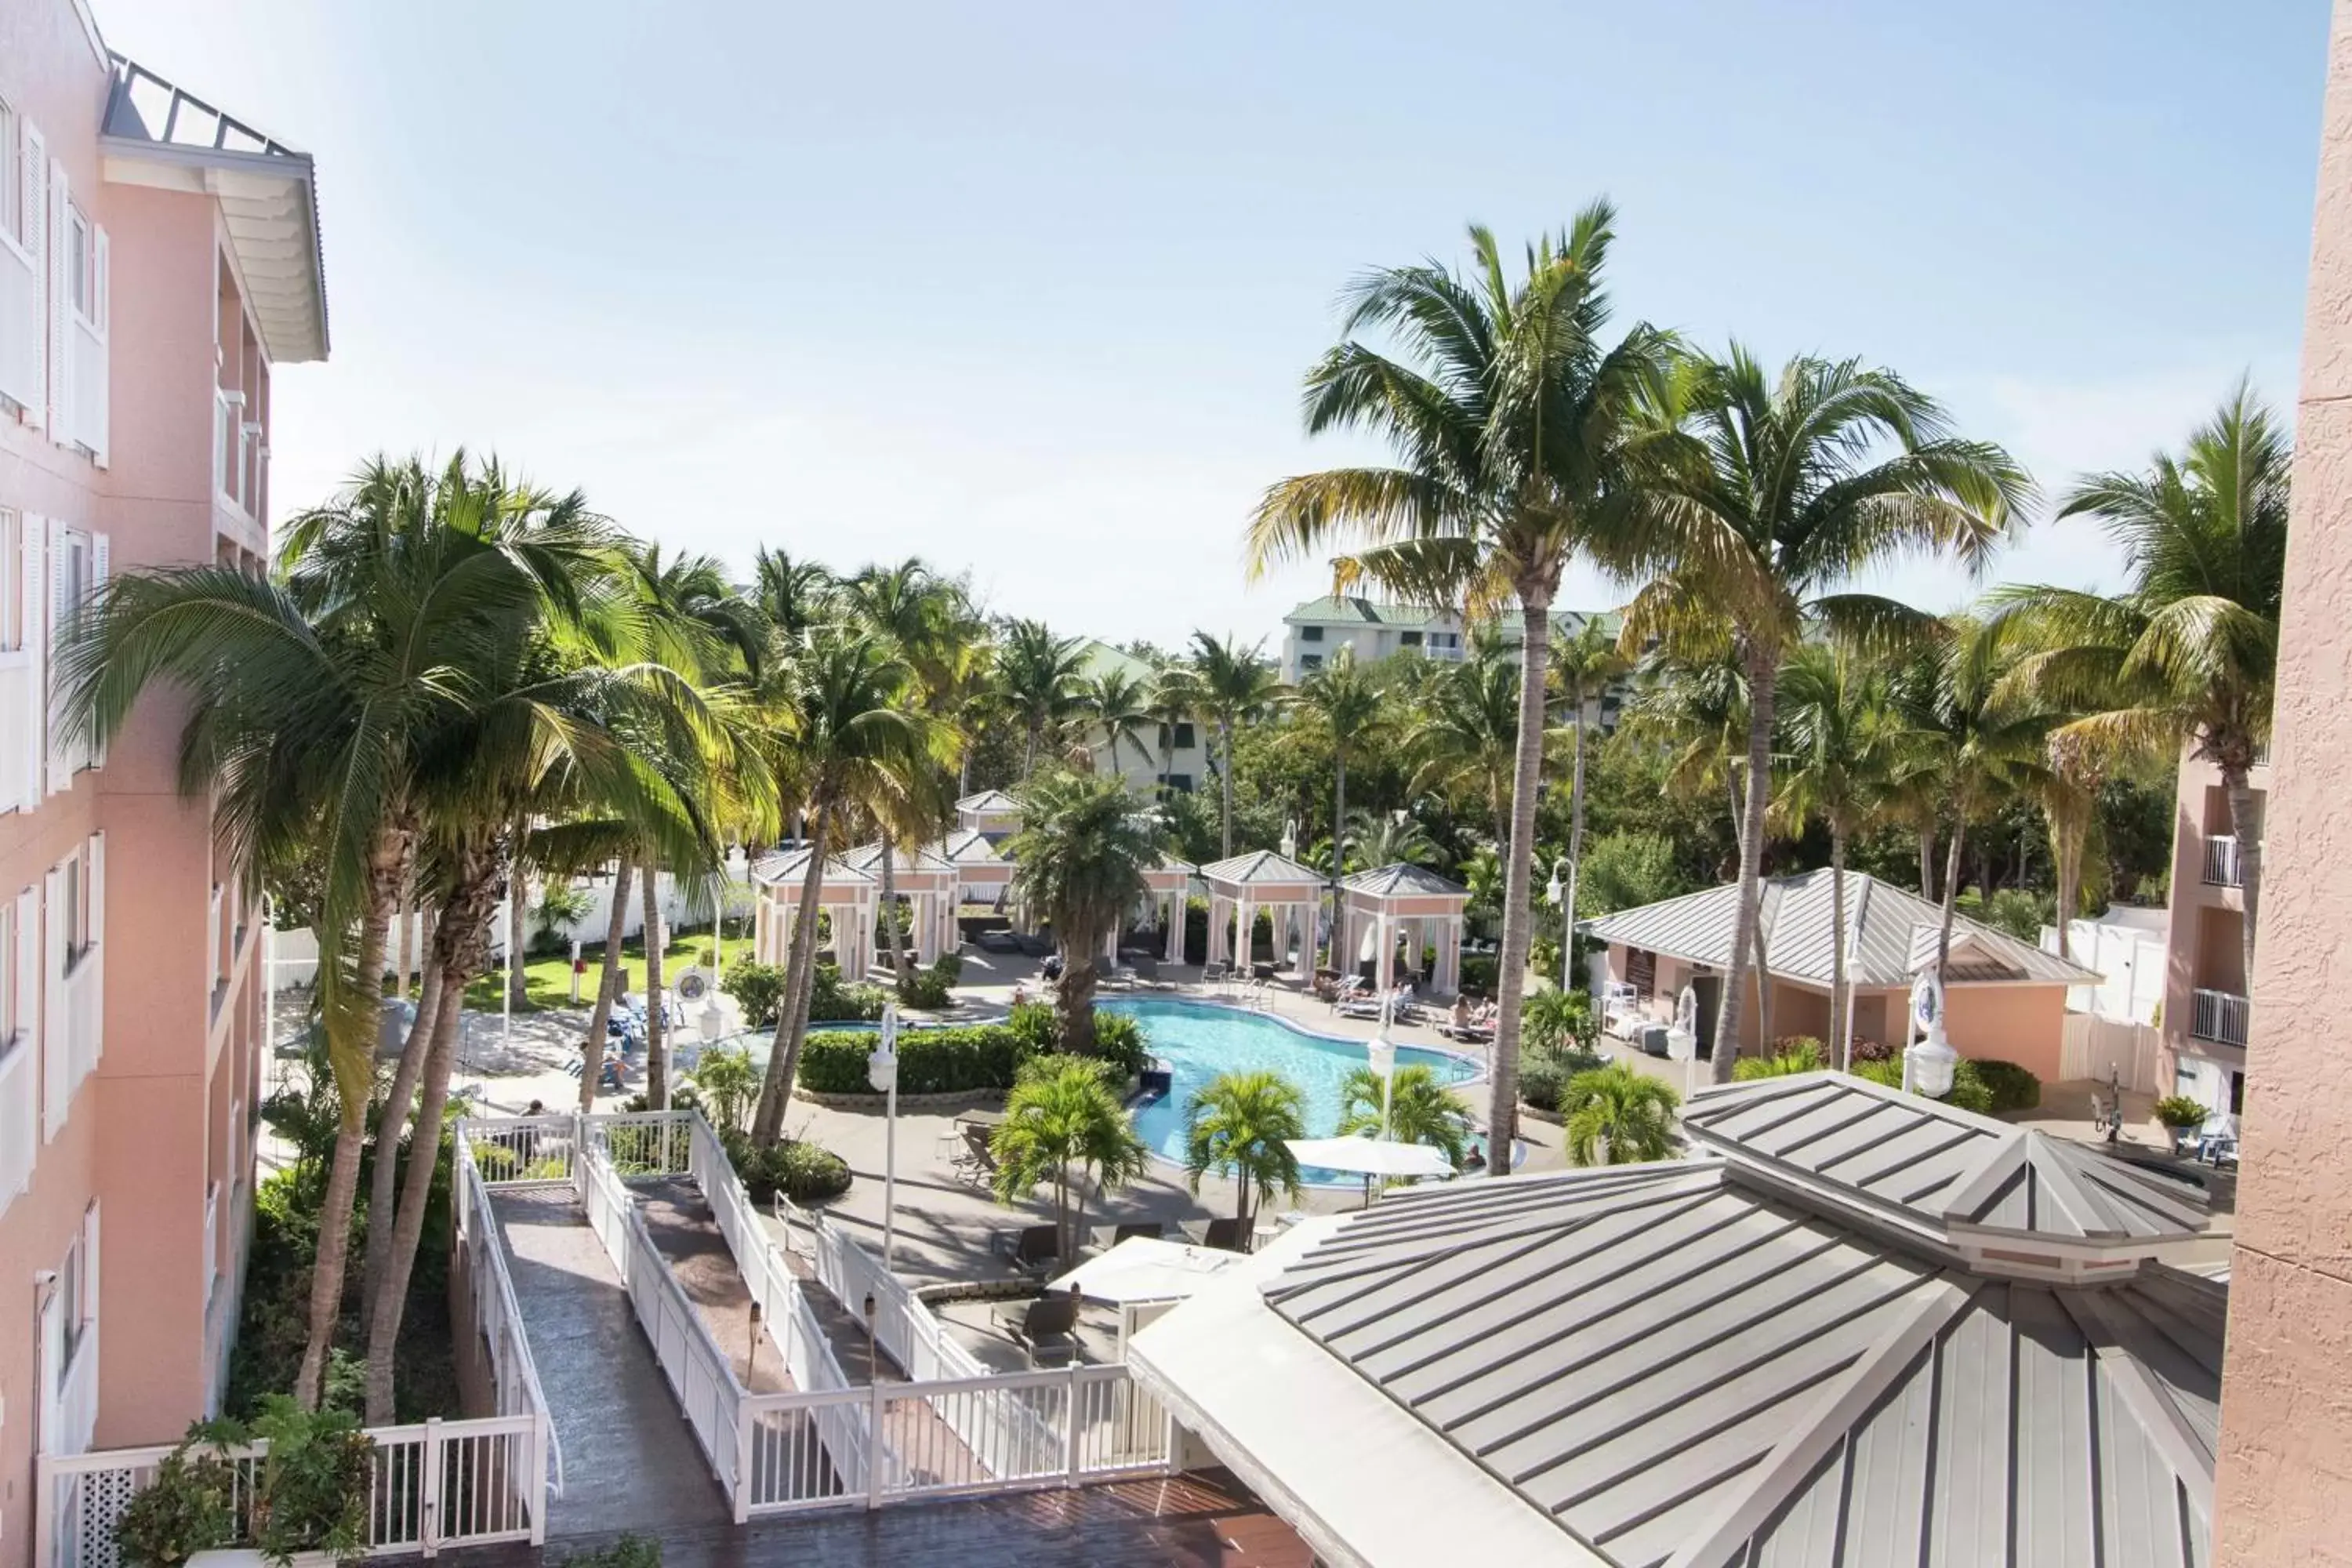 Property building, Pool View in DoubleTree by Hilton Grand Key Resort